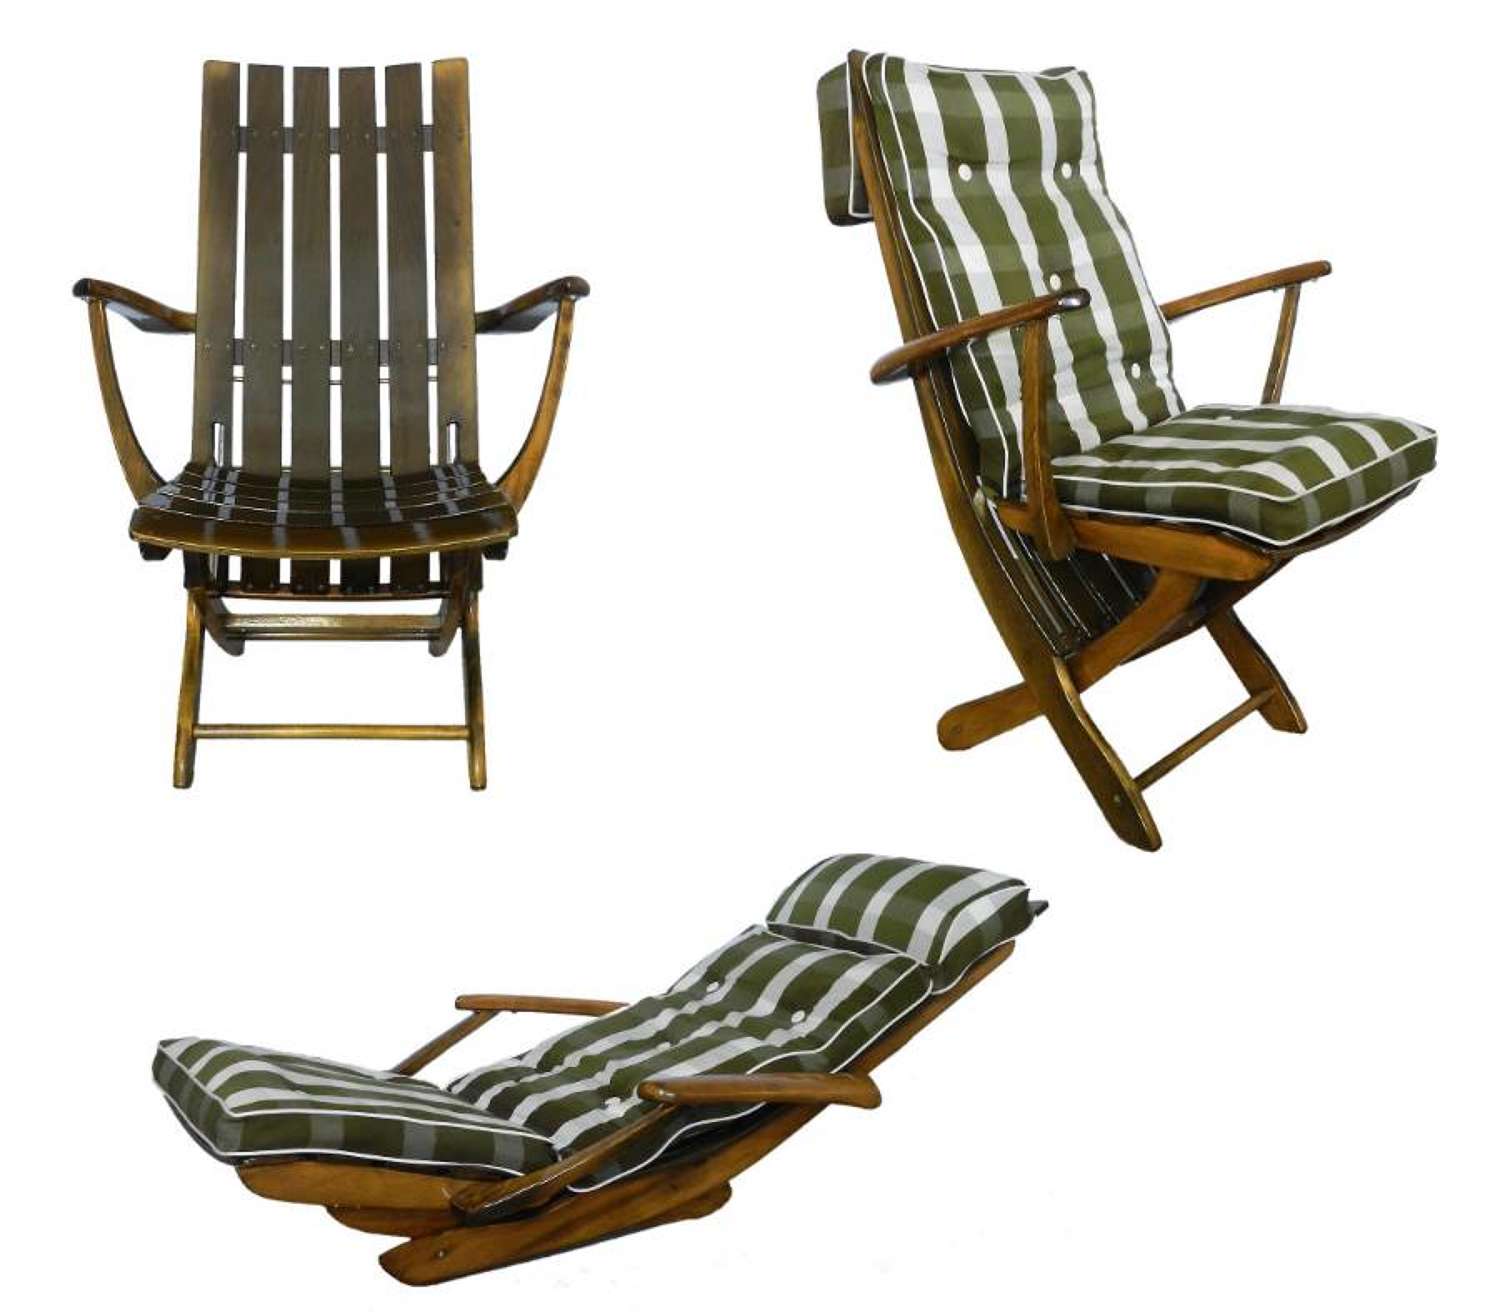 Midcentury French Adjustable Patio or Garden Furniture by Clairitex